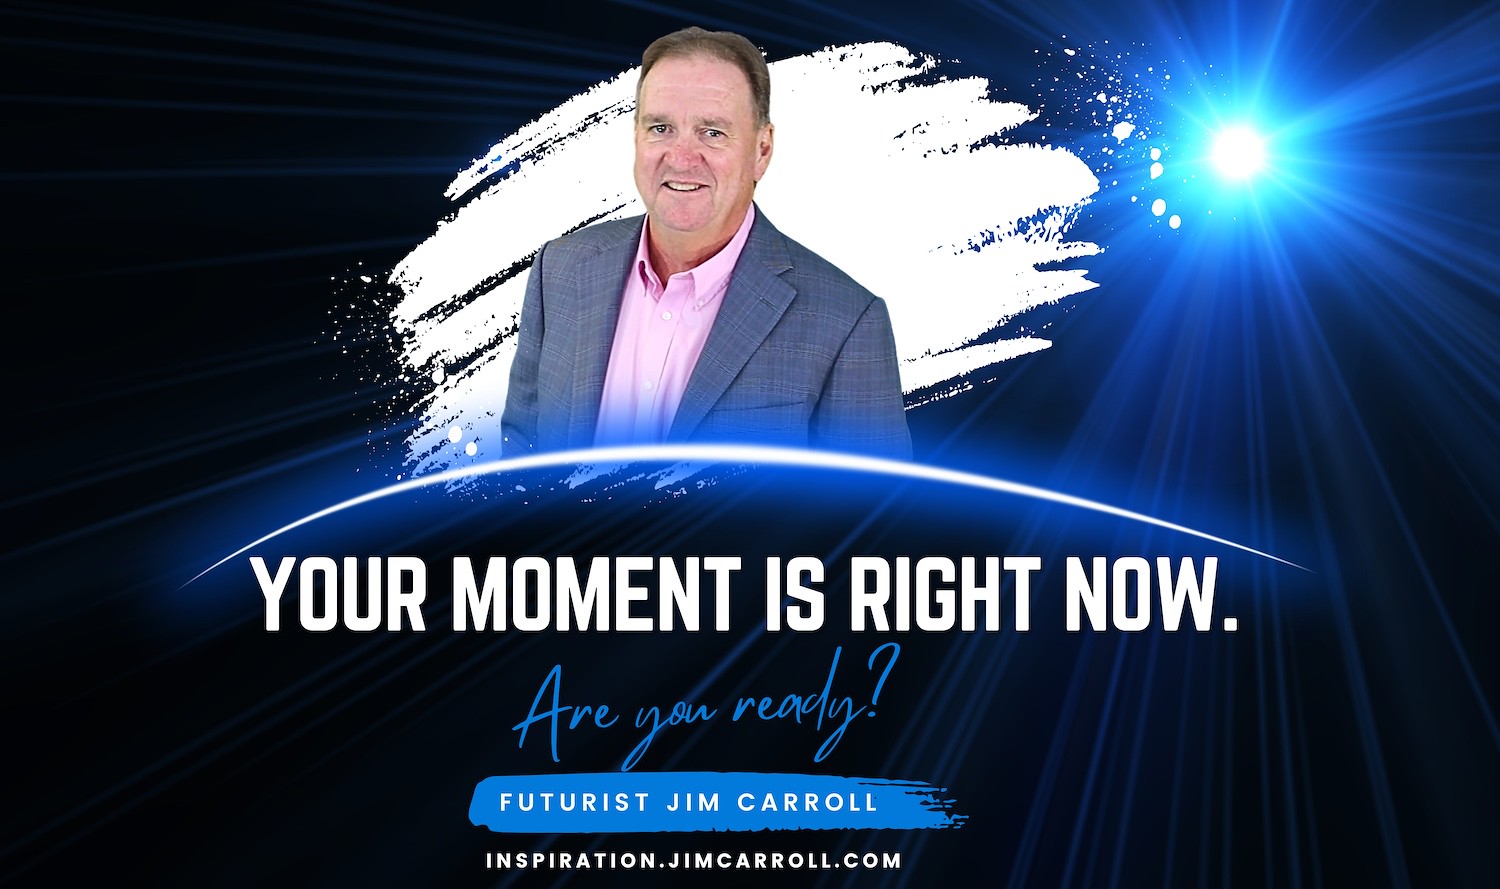 "Your moment is right now. Are you ready?" - Futurist Jim Carroll